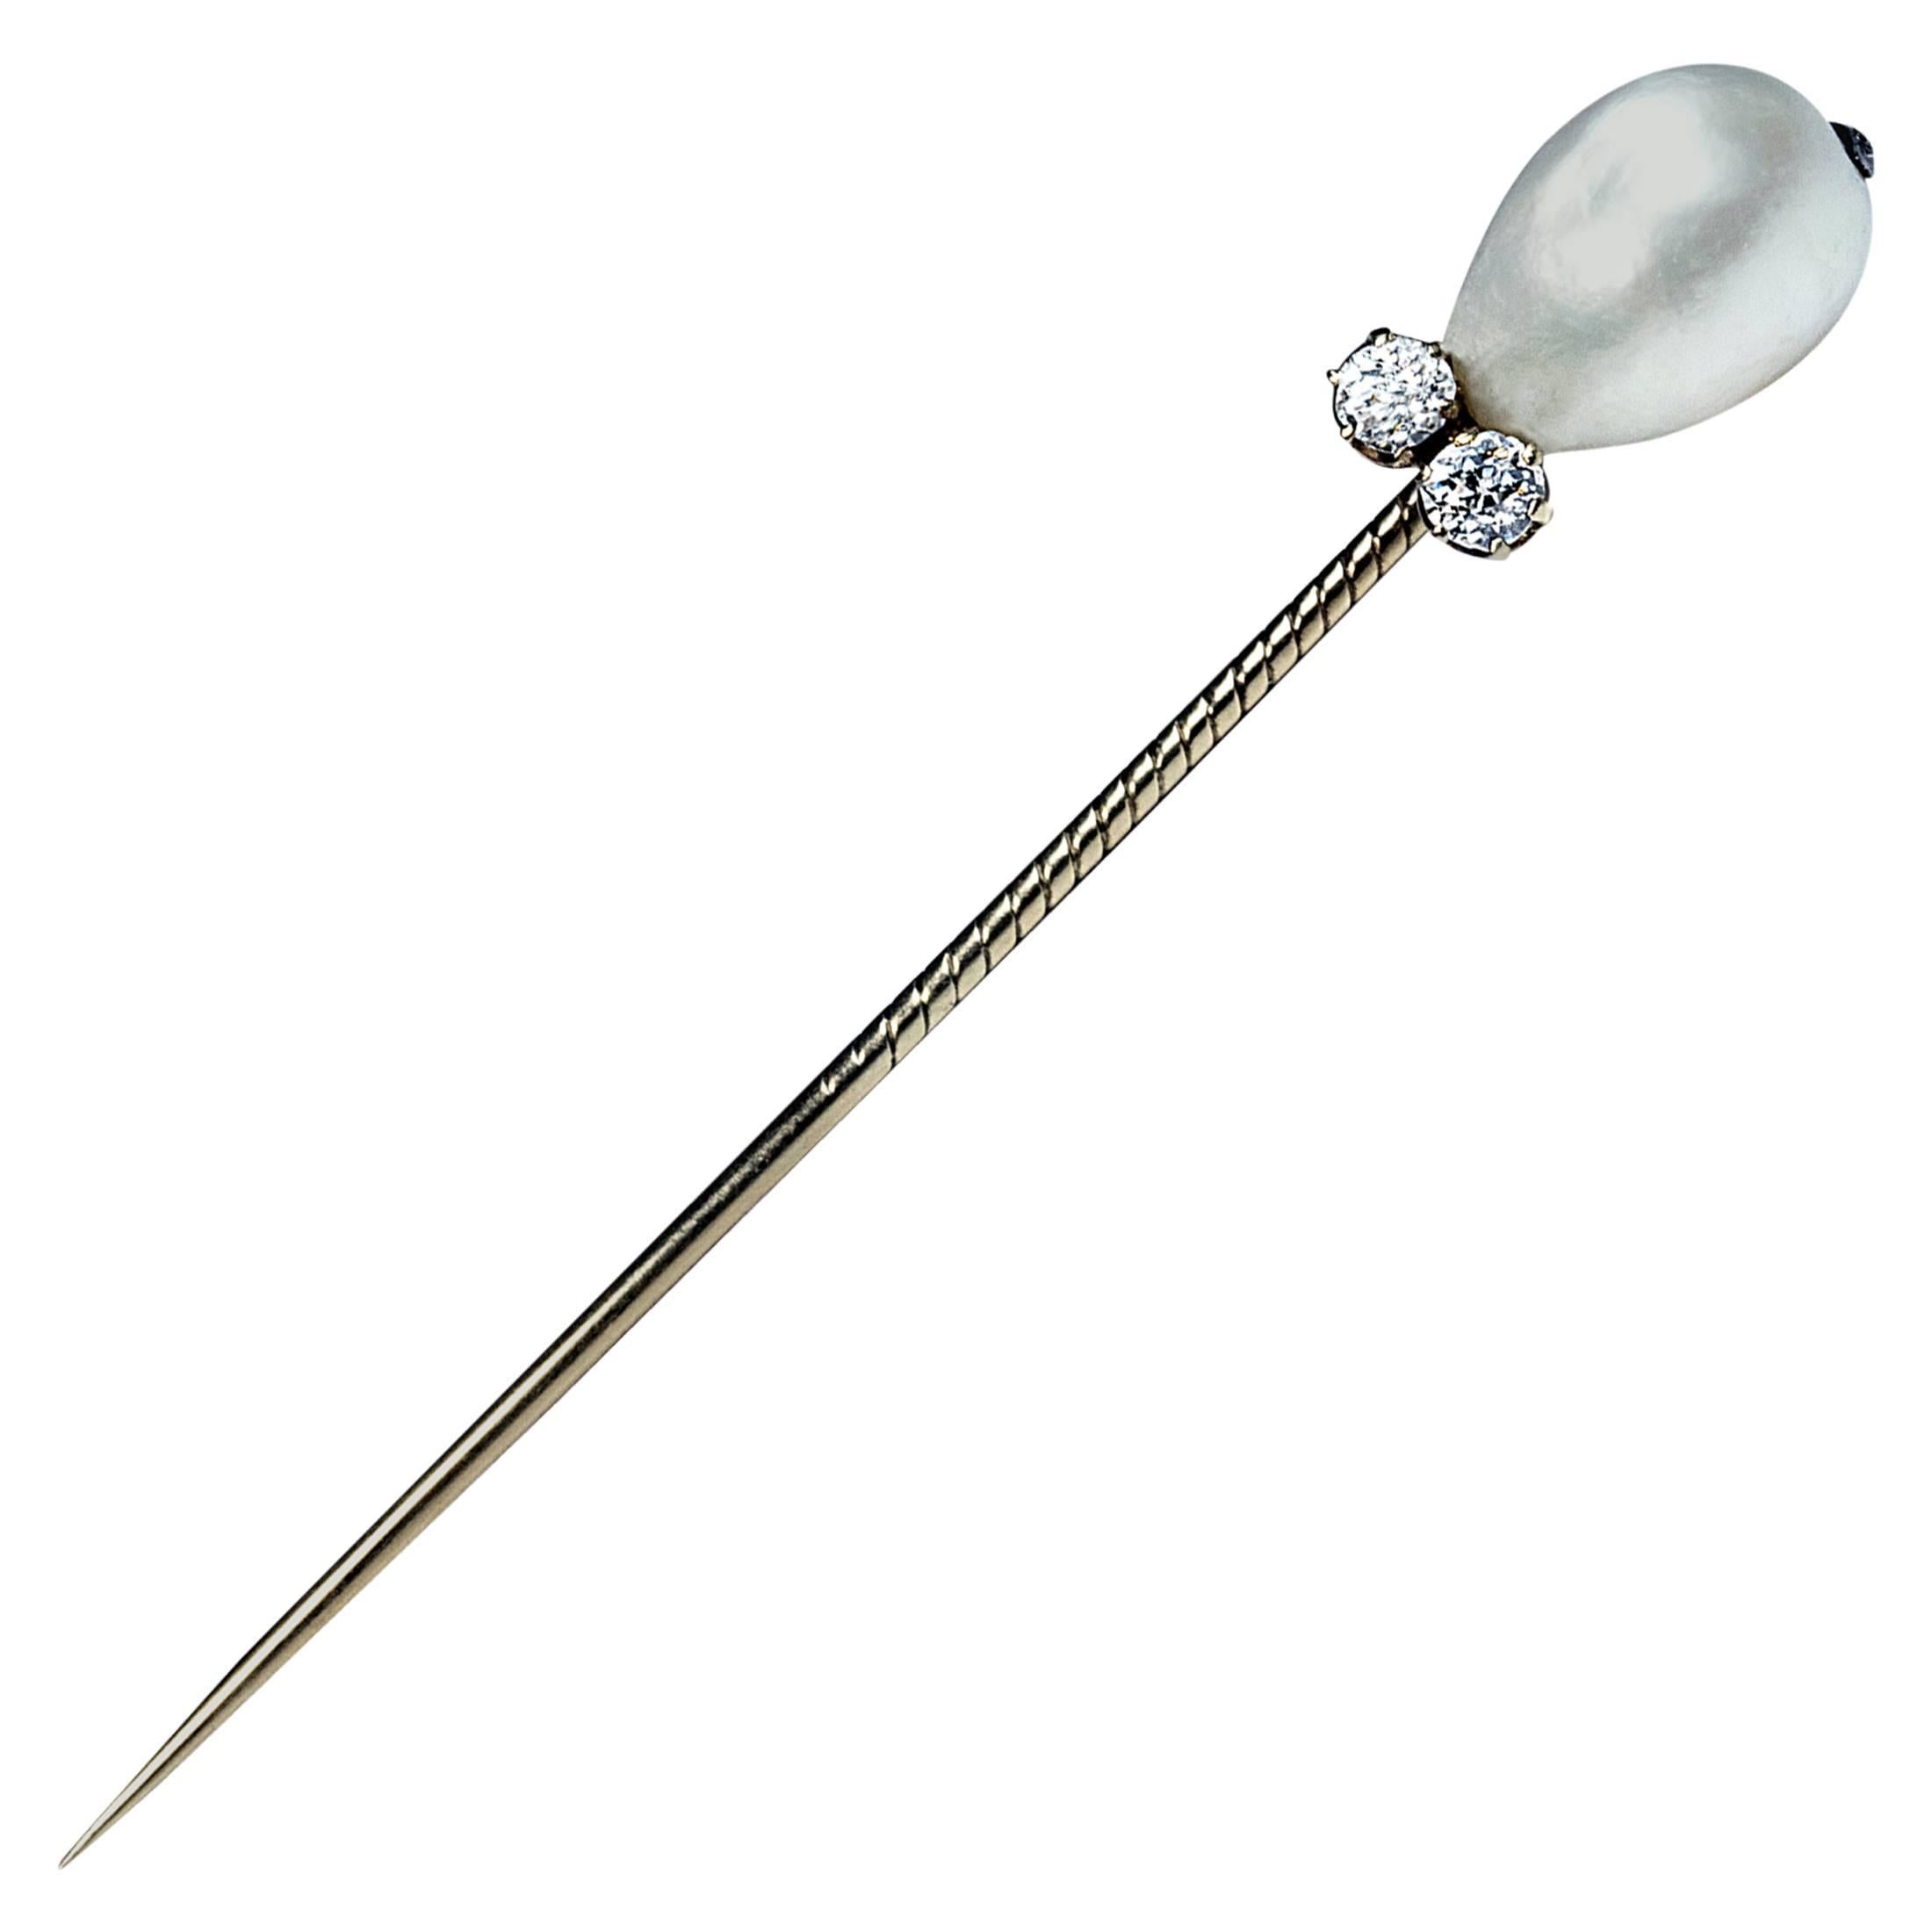 by Carl Faberge, made in St. Petersburg between 1882 and 1898

The 14K gold stickpin features a large drop shaped natural saltwater pearl (approximately 12.8 mm long) accented by two old European cut diamonds (estimated total diamond weight 0.30